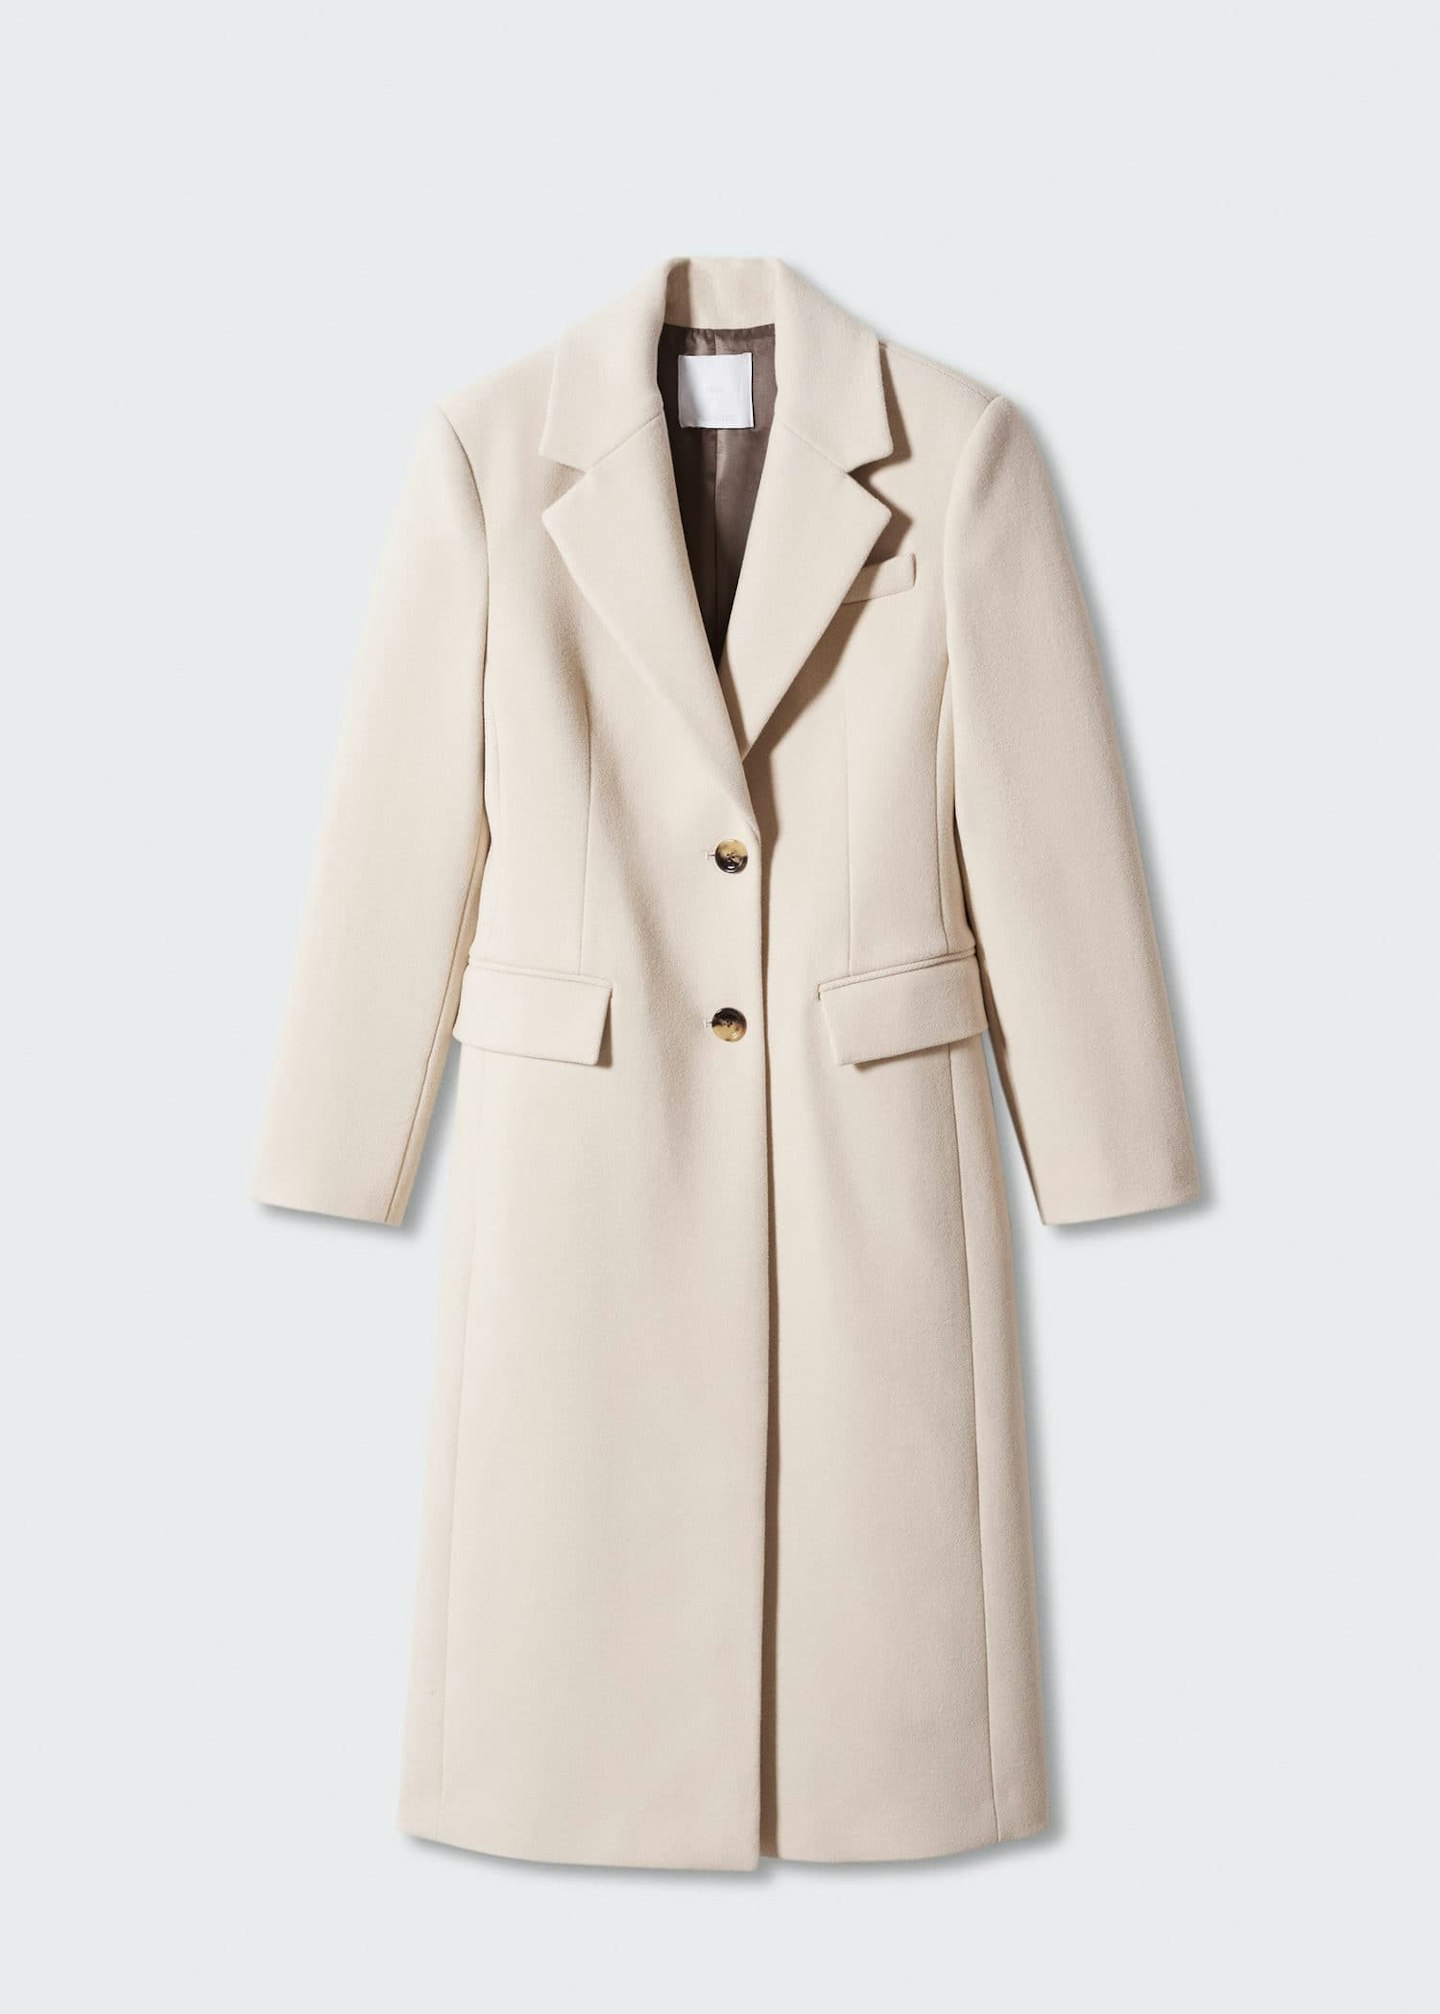 Chic Cream Coats That You Need To Add To Your Wardrobe Pronto